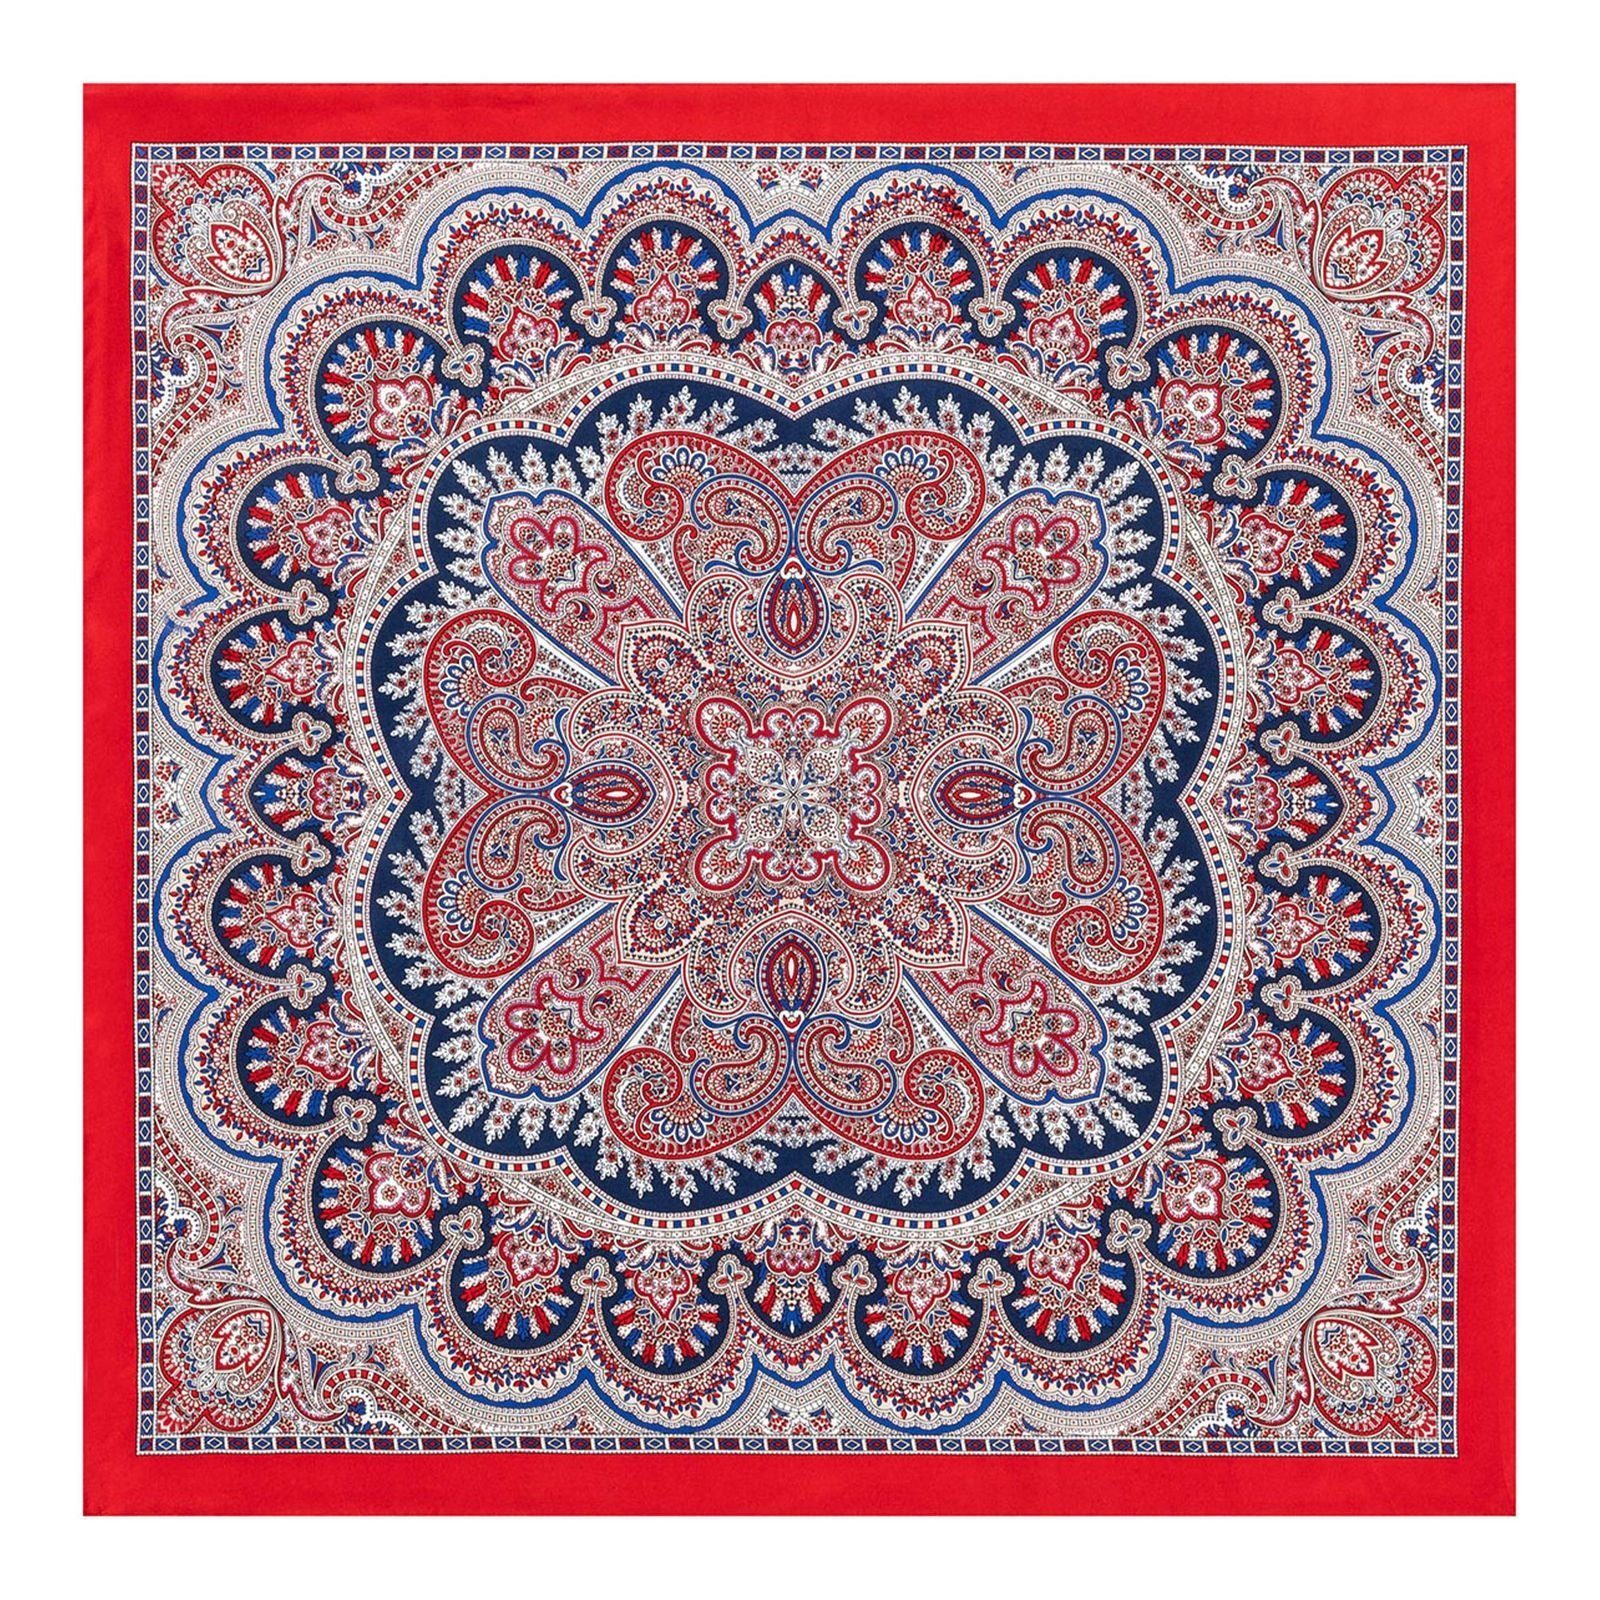 Modetuch Red Navy Young Roeckl / Paisley